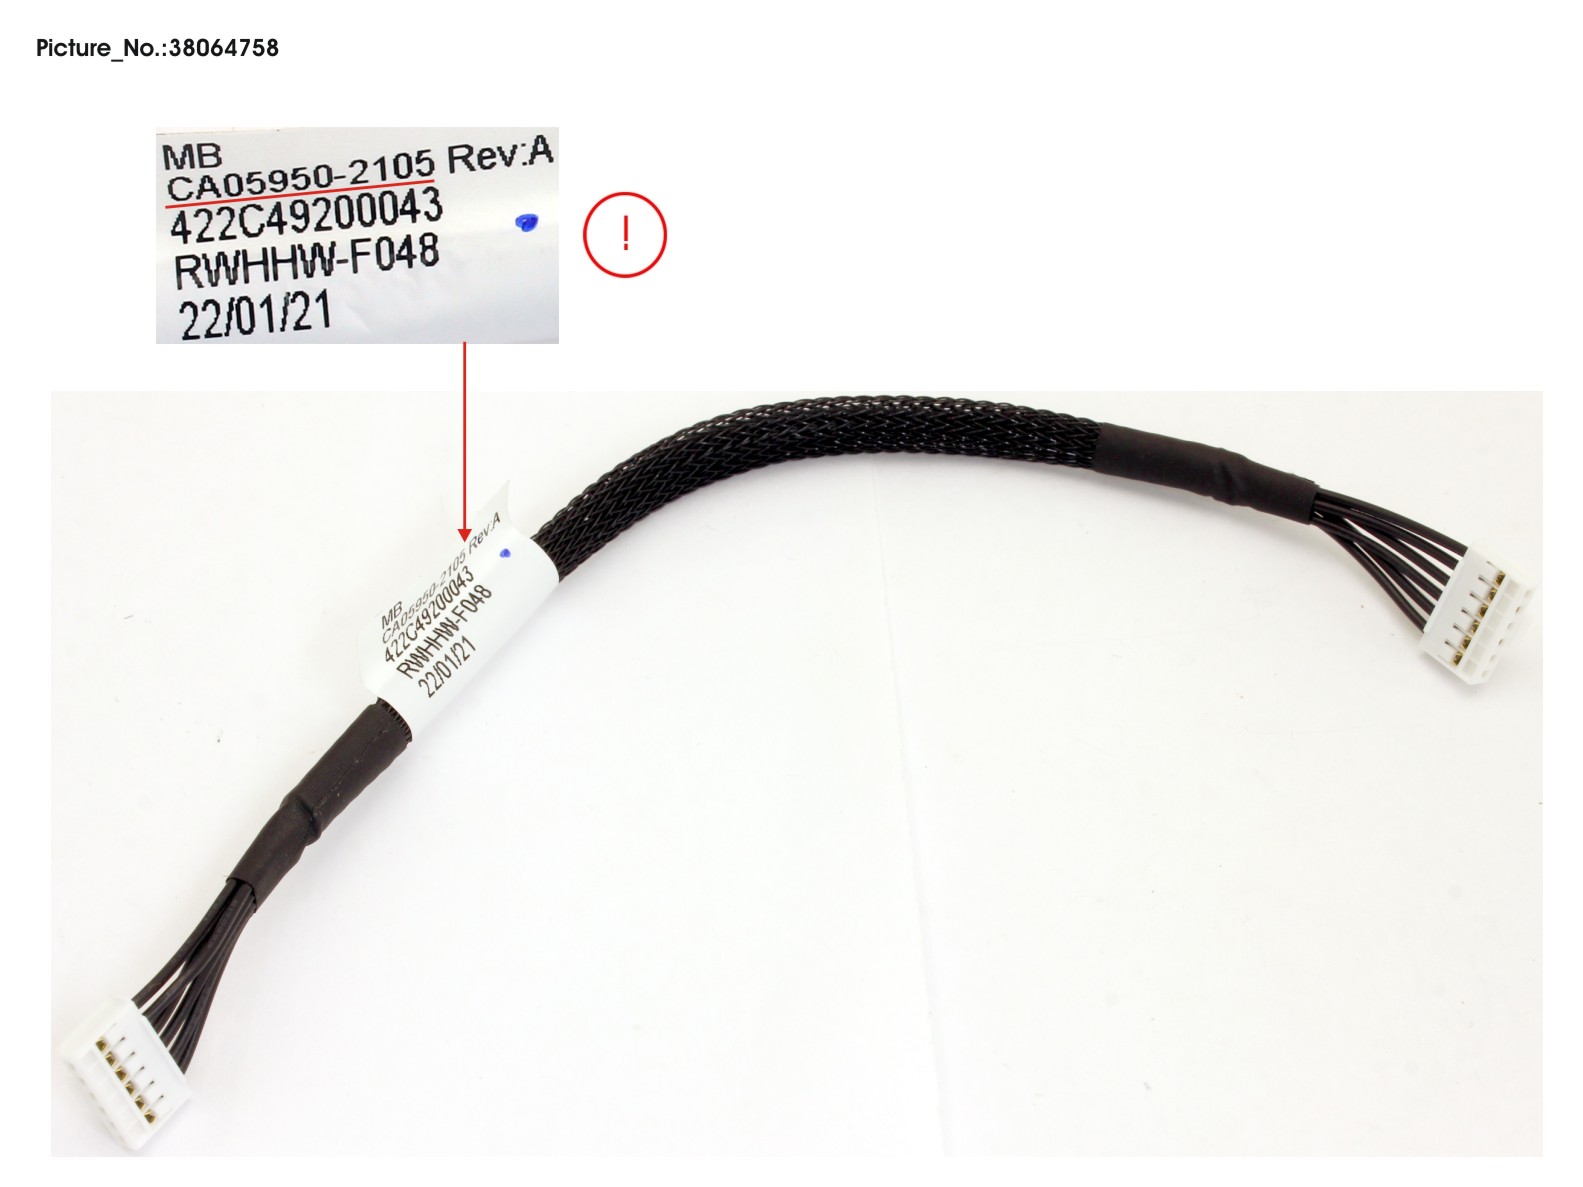 OOB 10X/12X 3.5BP SIGNAL CABLE(MB-10X/12